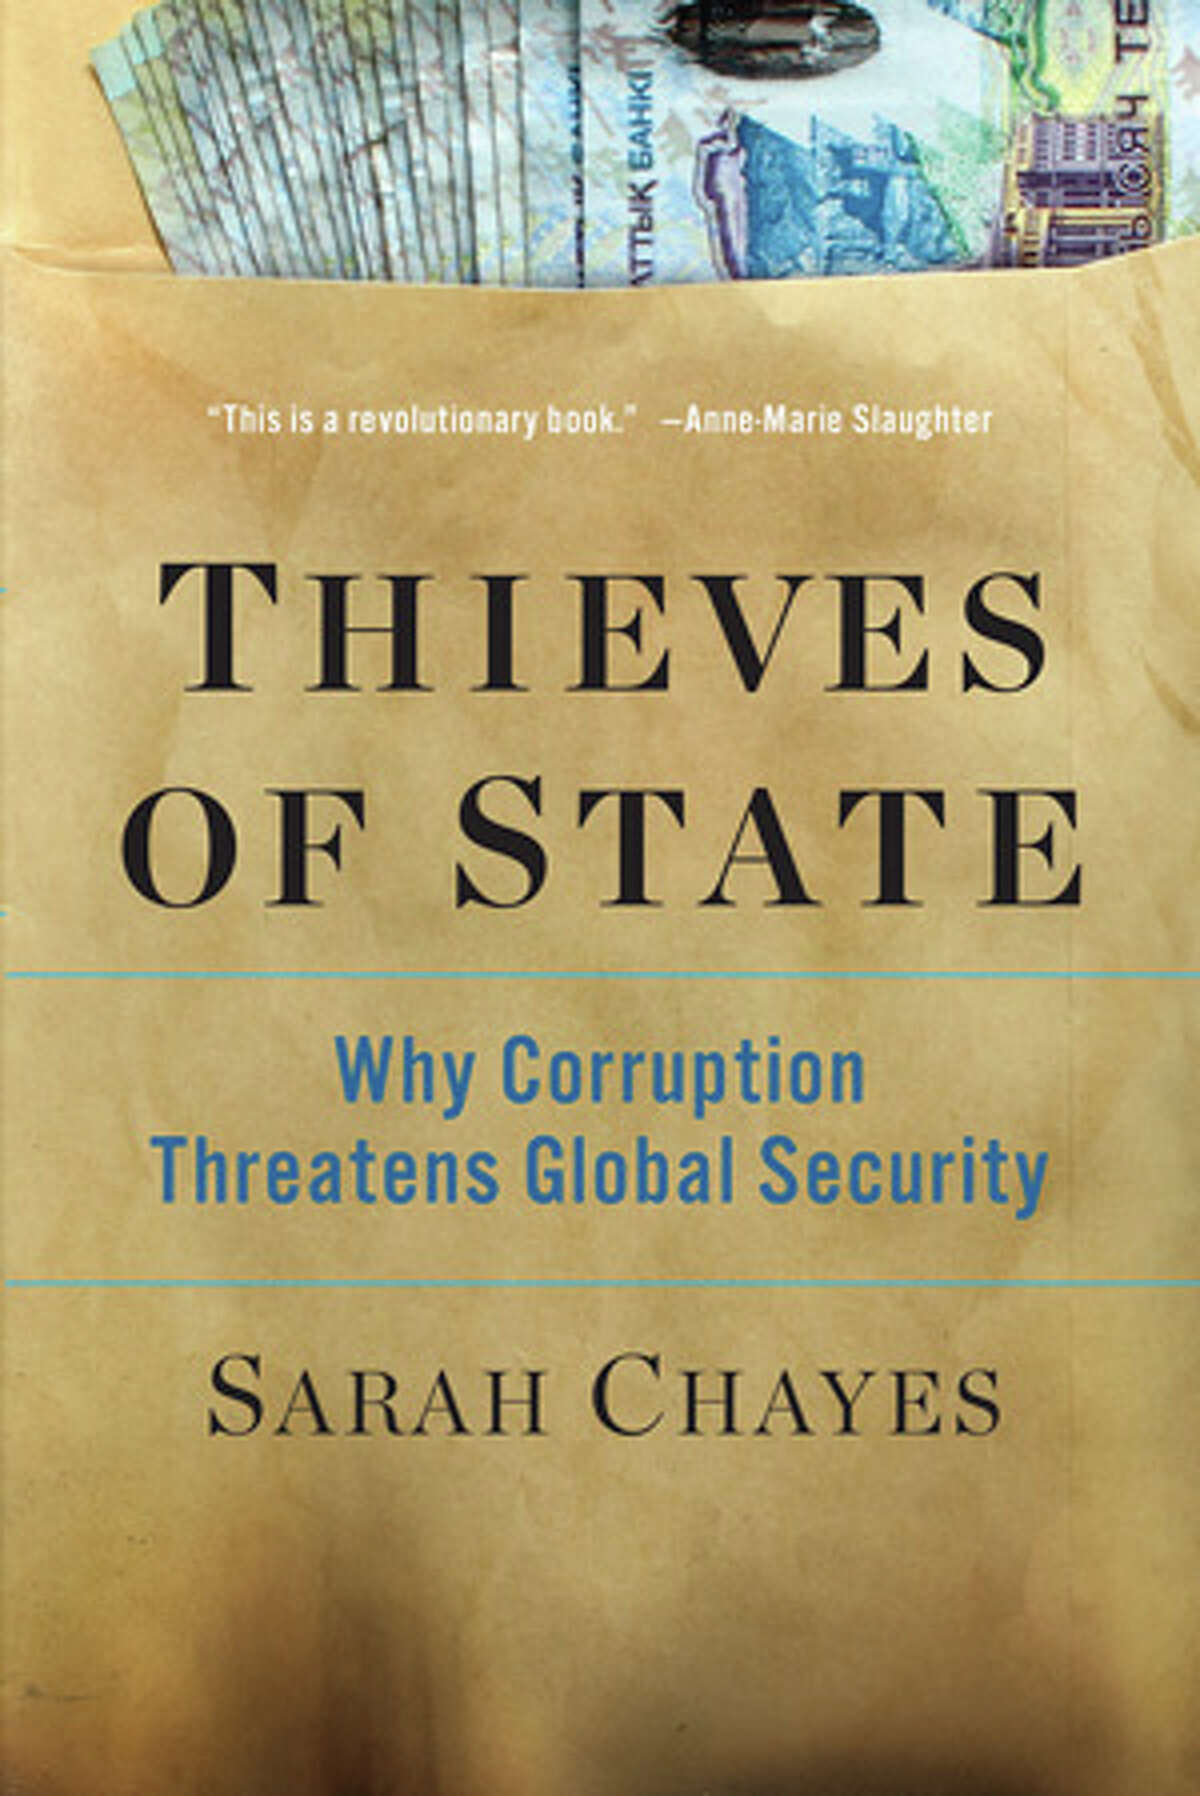 “Thieves of State: Why Corruption Threatens Global Security,” by Sarah Chayes